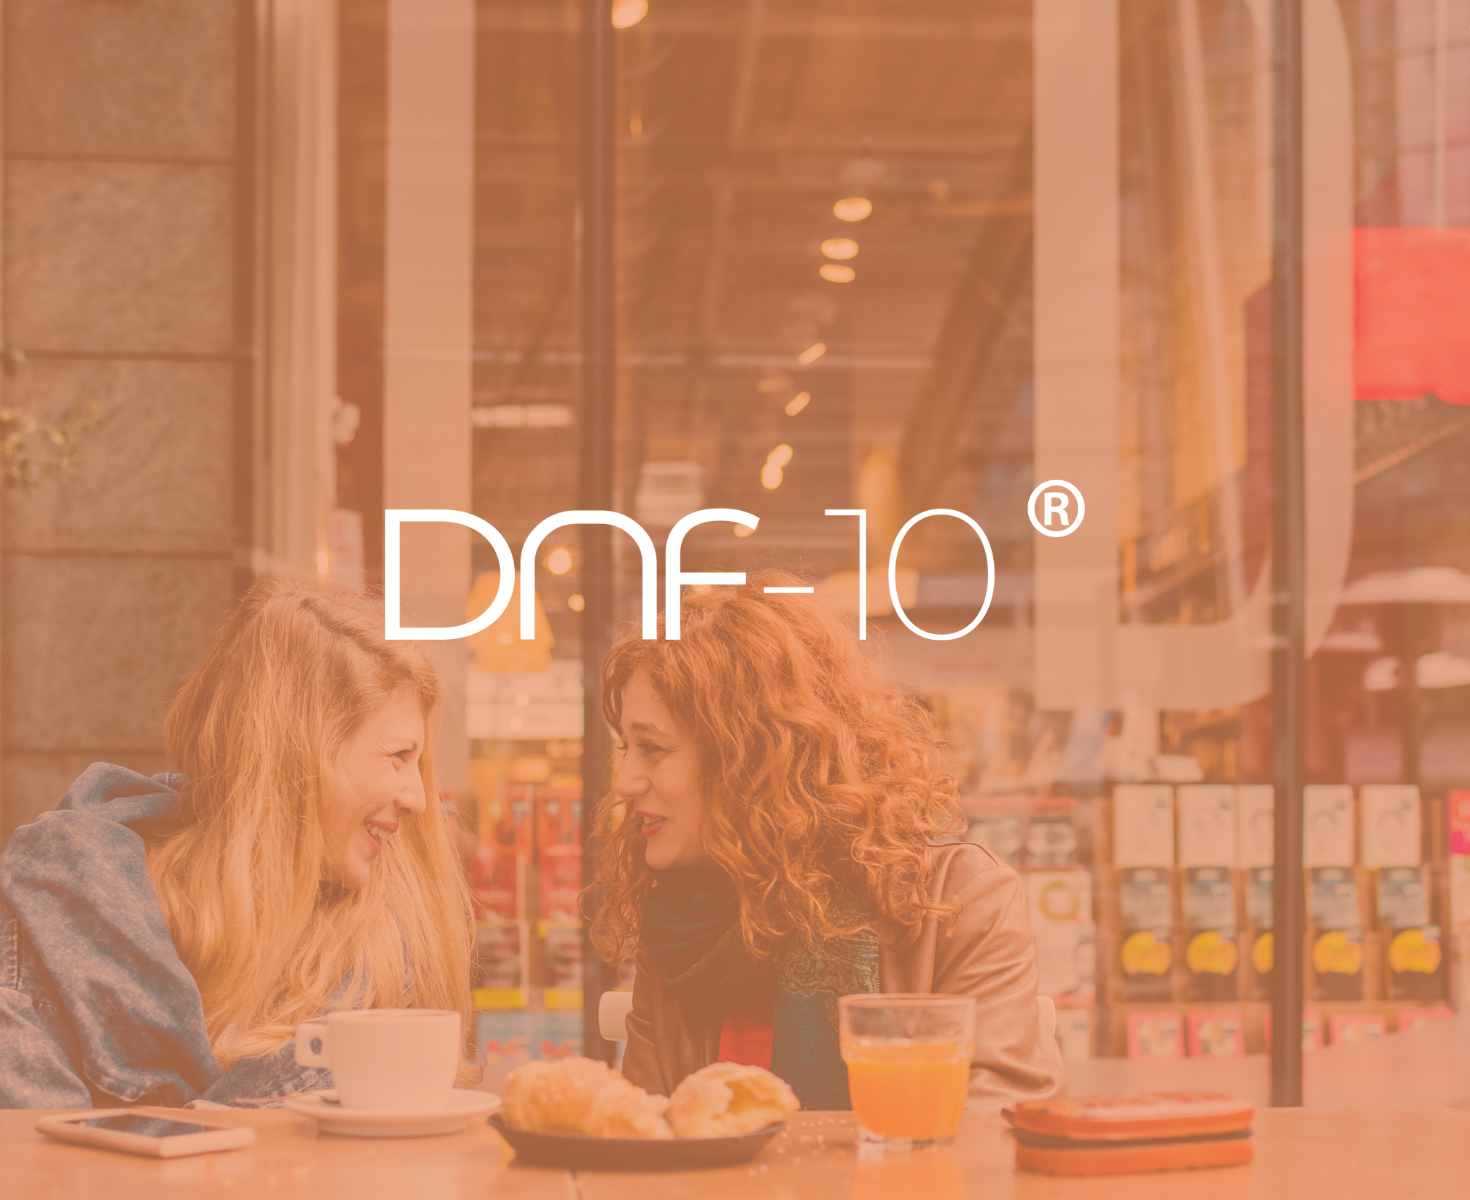 DNF-10® - Protein hydrolysate for apetite control